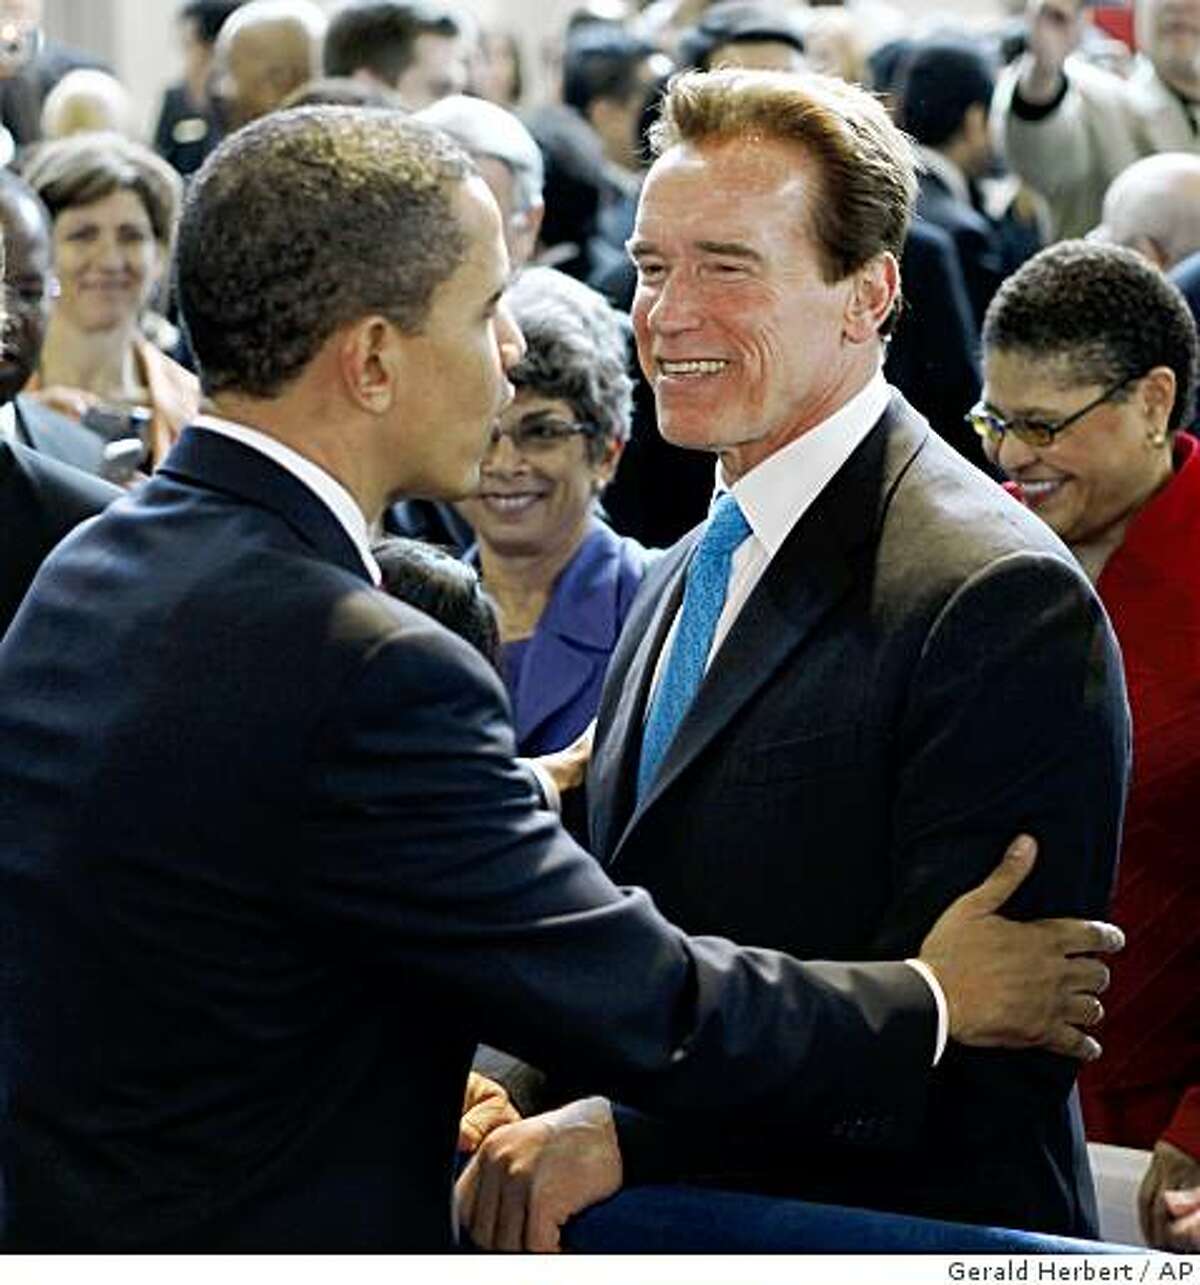 President Barack Obama greets California Gov. Arnold Schwarzenegger after speaking at a town hall meeting at the Miguel Contreras Learning Complex in Los Angeles, Thursday, March 19, 2009. (AP Photo/Gerald Herbert)